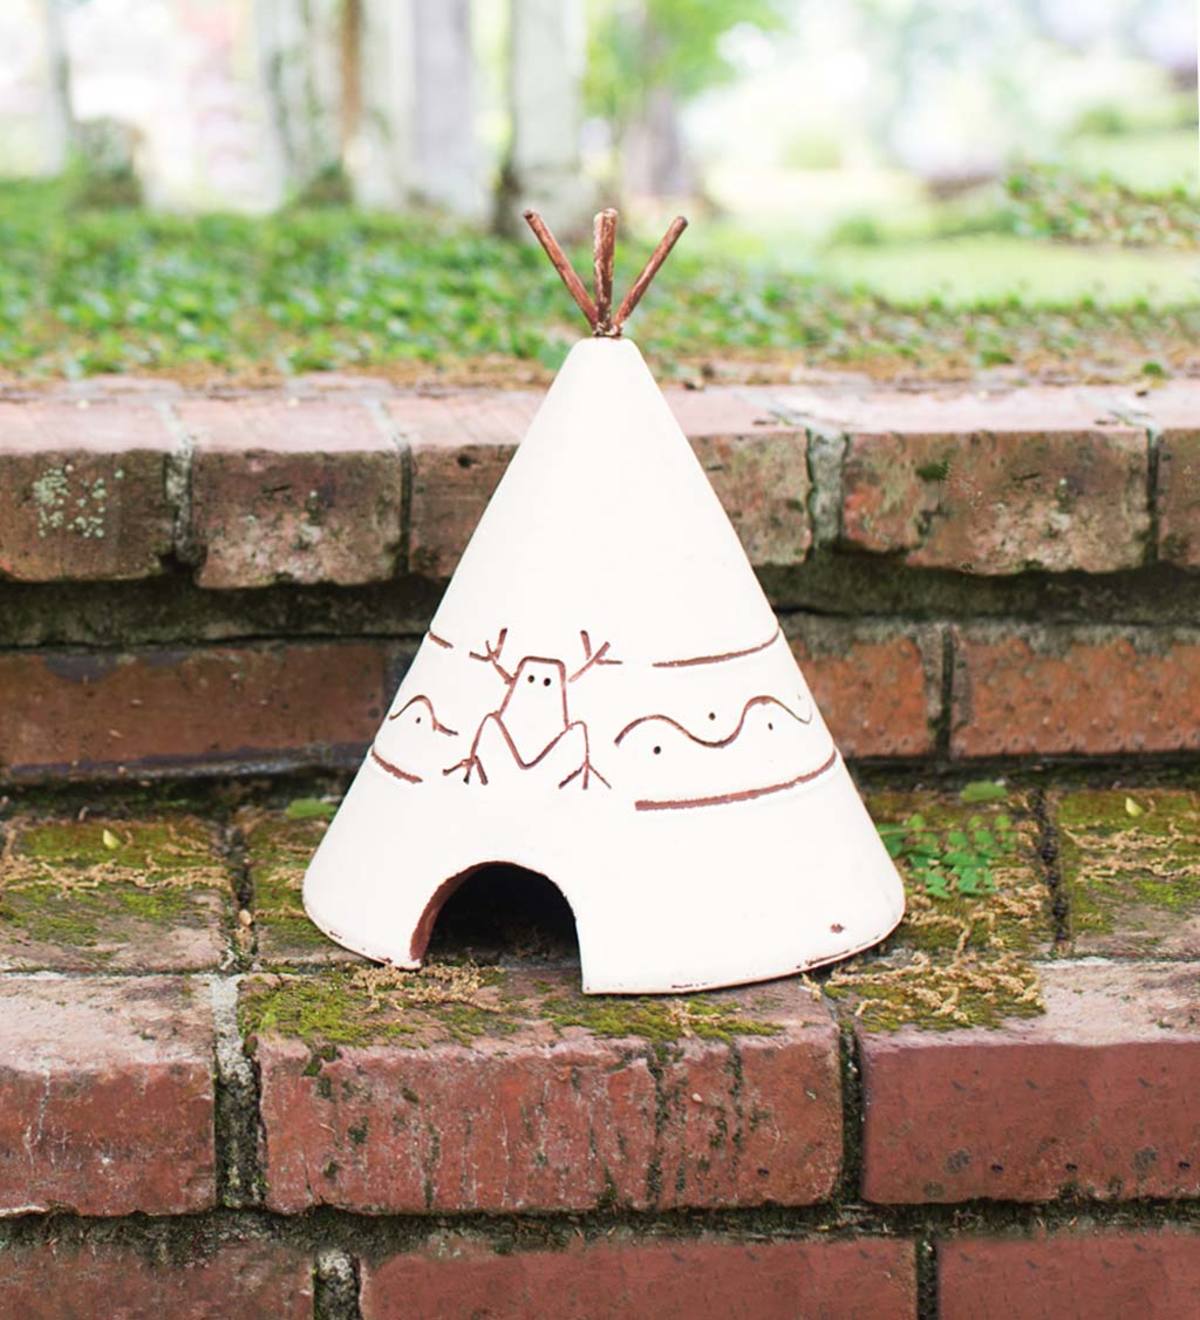 Teepee-Style Clay Toad House